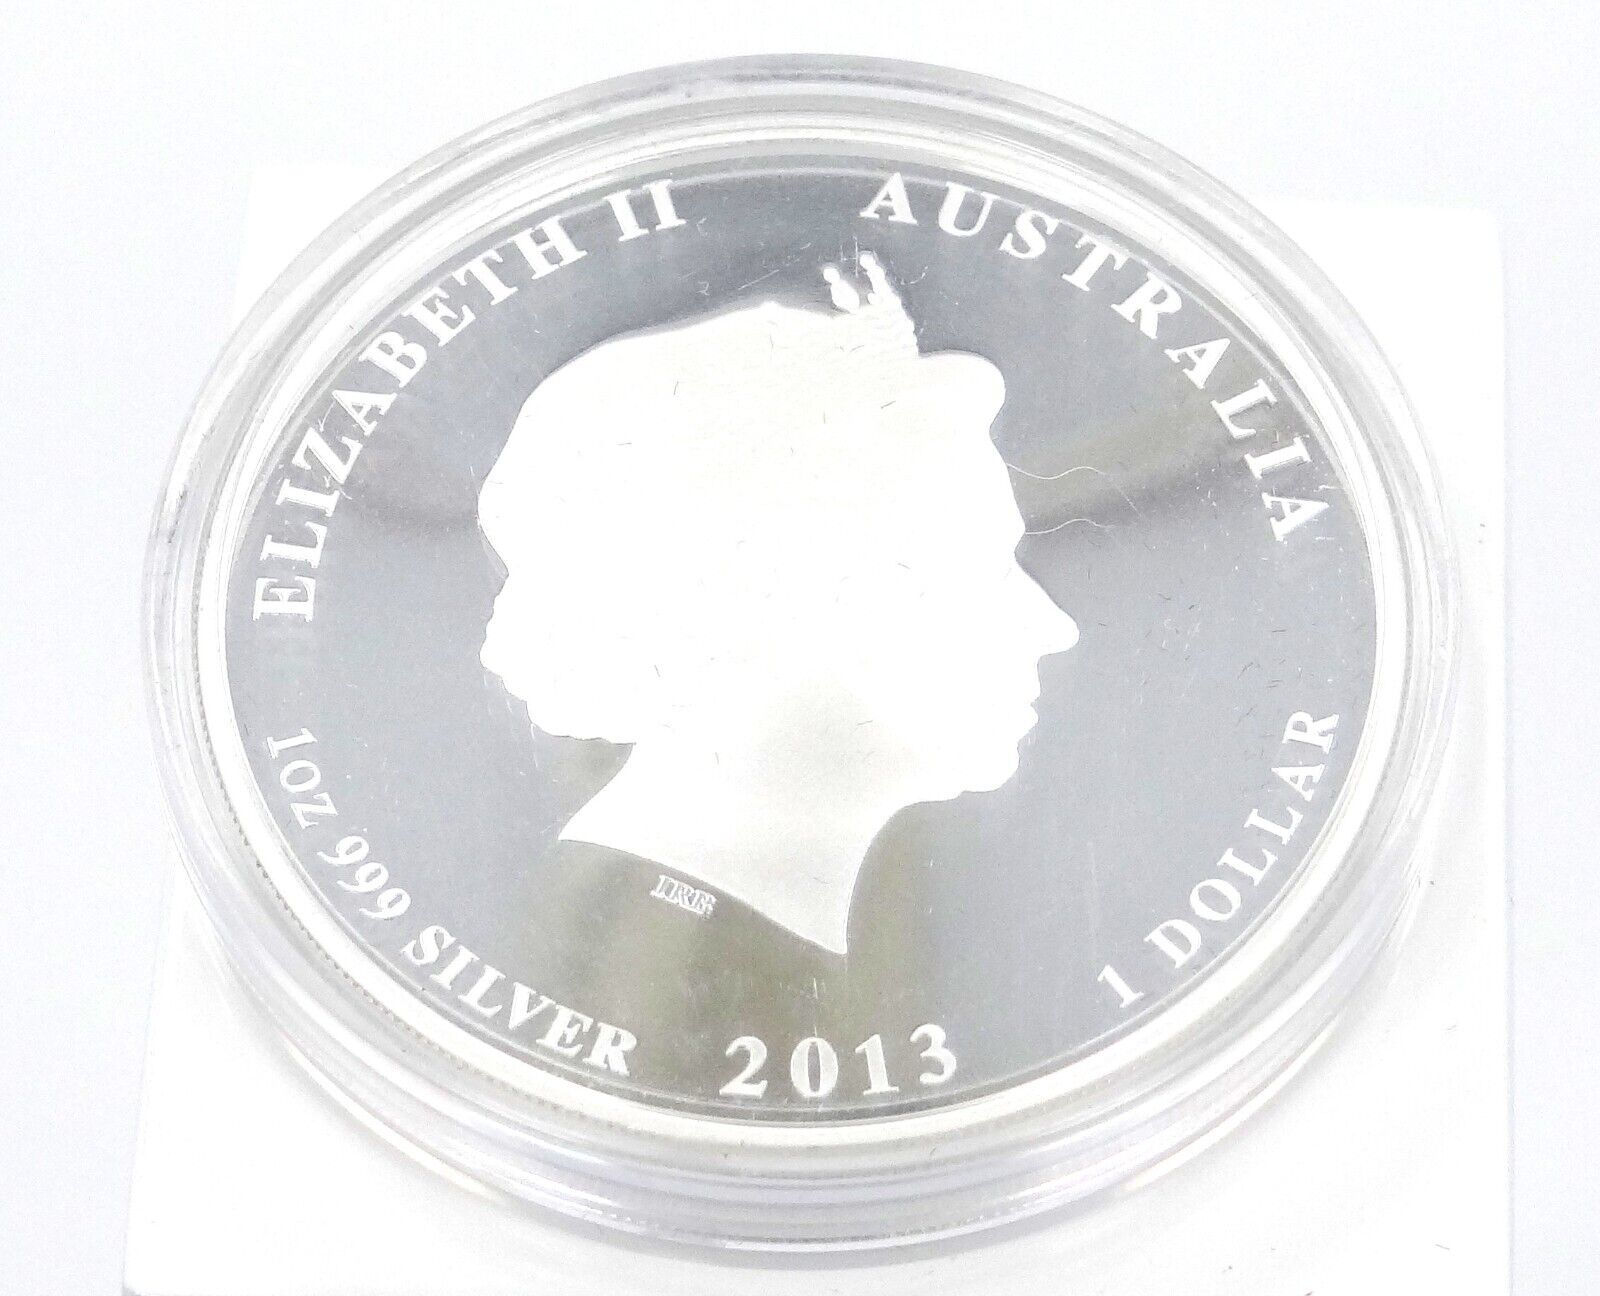 1 Oz Silver Coin 2013 $0.50 Australian Lunar Series II Year of The Snake Color-classypw.com-2